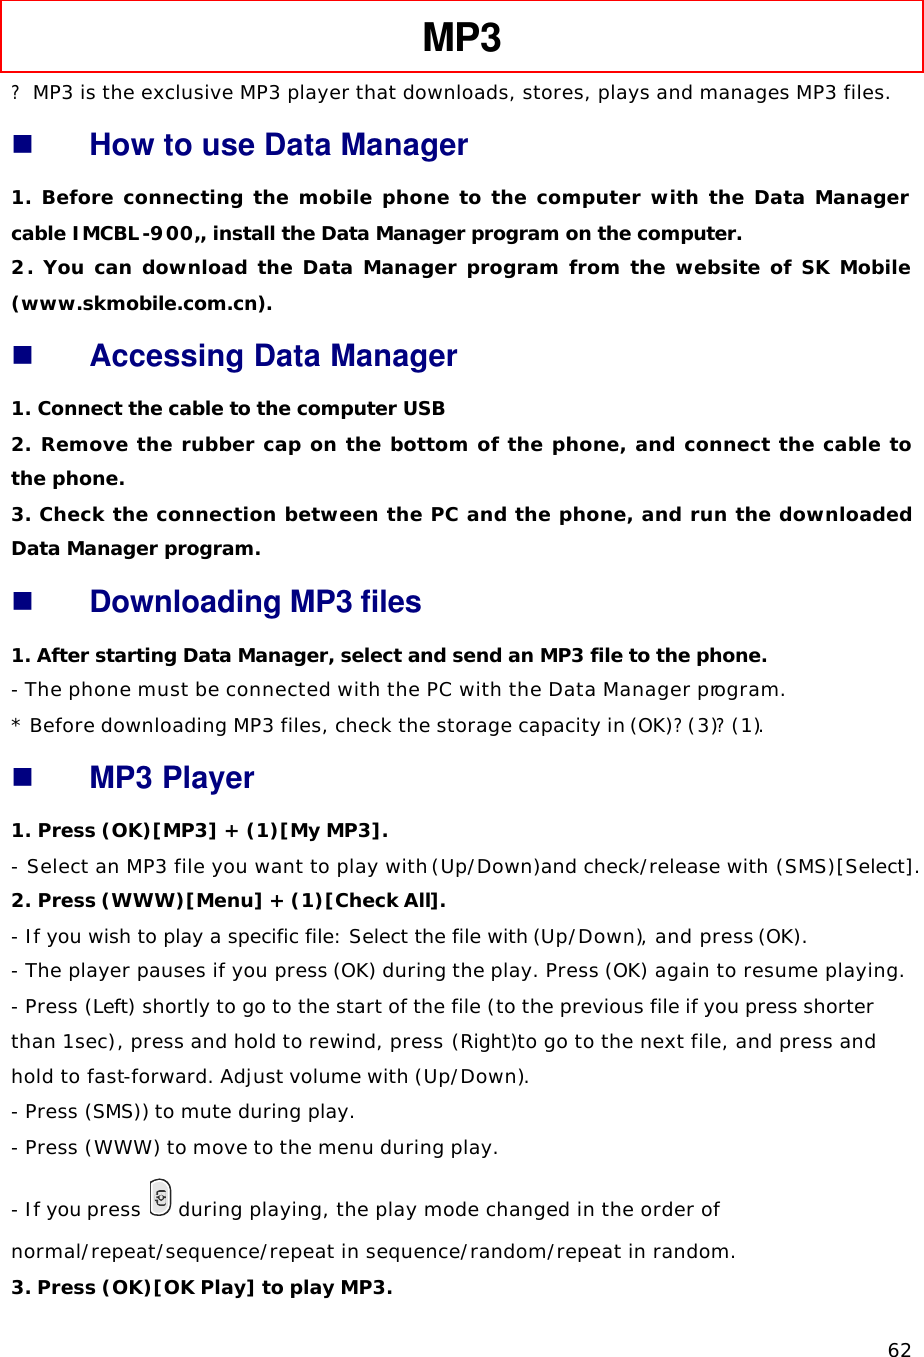   62 MP3   ? MP3 is the exclusive MP3 player that downloads, stores, plays and manages MP3 files. n How to use Data Manager 1. Before connecting the mobile phone to the computer with the Data Manager cable IMCBL-900,, install the Data Manager program on the computer. 2. You can download the Data Manager program from the website of SK Mobile (www.skmobile.com.cn).  n Accessing Data Manager 1. Connect the cable to the computer USB 2.  Remove the rubber cap on the bottom of the phone, and connect the cable to the phone. 3. Check the connection between the PC and the phone, and run the downloaded Data Manager program. n Downloading MP3 files 1. After starting Data Manager, select and send an MP3 file to the phone. - The phone must be connected with the PC with the Data Manager program. * Before downloading MP3 files, check the storage capacity in (OK)?(3)?(1). n MP3 Player 1. Press (OK)[MP3] + (1)[My MP3].  - Select an MP3 file you want to play with (Up/Down)and check/release with (SMS)[Select].  2. Press (WWW)[Menu] + (1)[Check All].  - If you wish to play a specific file: Select the file with (Up/Down), and press (OK).   - The player pauses if you press (OK) during the play. Press (OK) again to resume playing. - Press (Left) shortly to go to the start of the file (to the previous file if you press shorter than 1sec), press and hold to rewind, press (Right)to go to the next file, and press and hold to fast-forward. Adjust volume with (Up/Down). - Press (SMS)) to mute during play. - Press (WWW) to move to the menu during play. - If you press   during playing, the play mode changed in the order of normal/repeat/sequence/repeat in sequence/random/repeat in random. 3. Press (OK)[OK Play] to play MP3.  